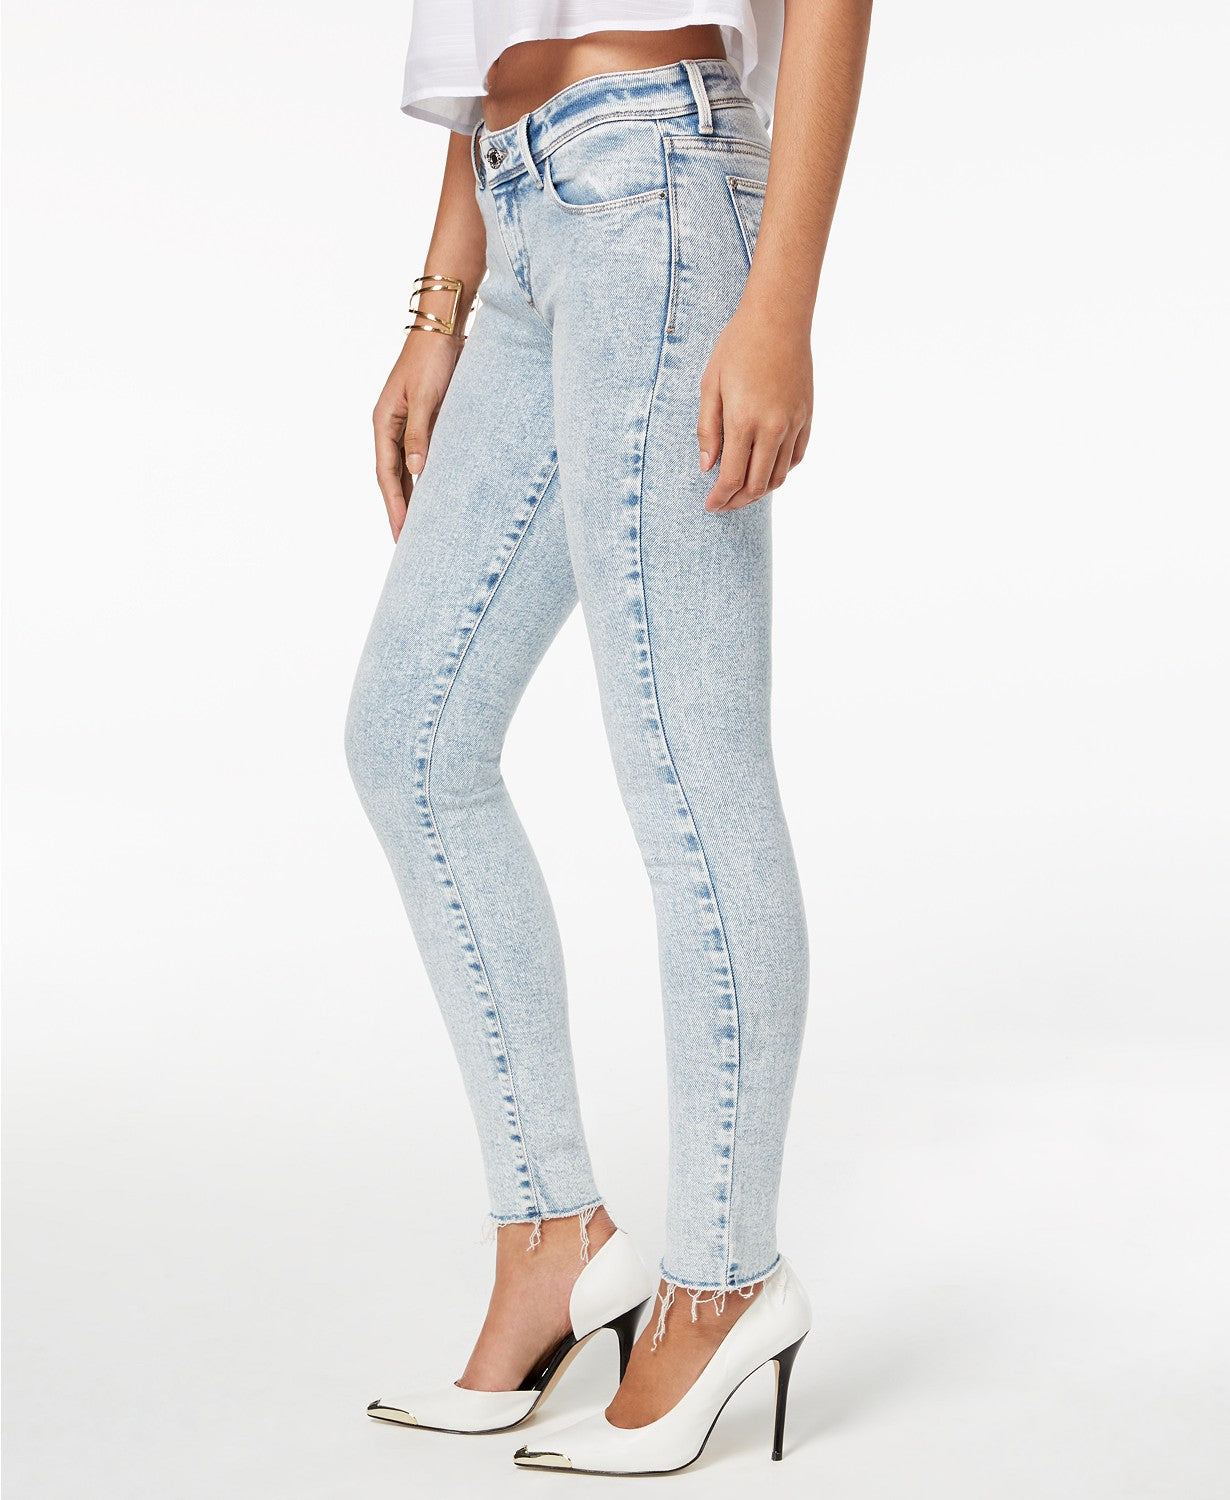 urban outfitters vintage levis